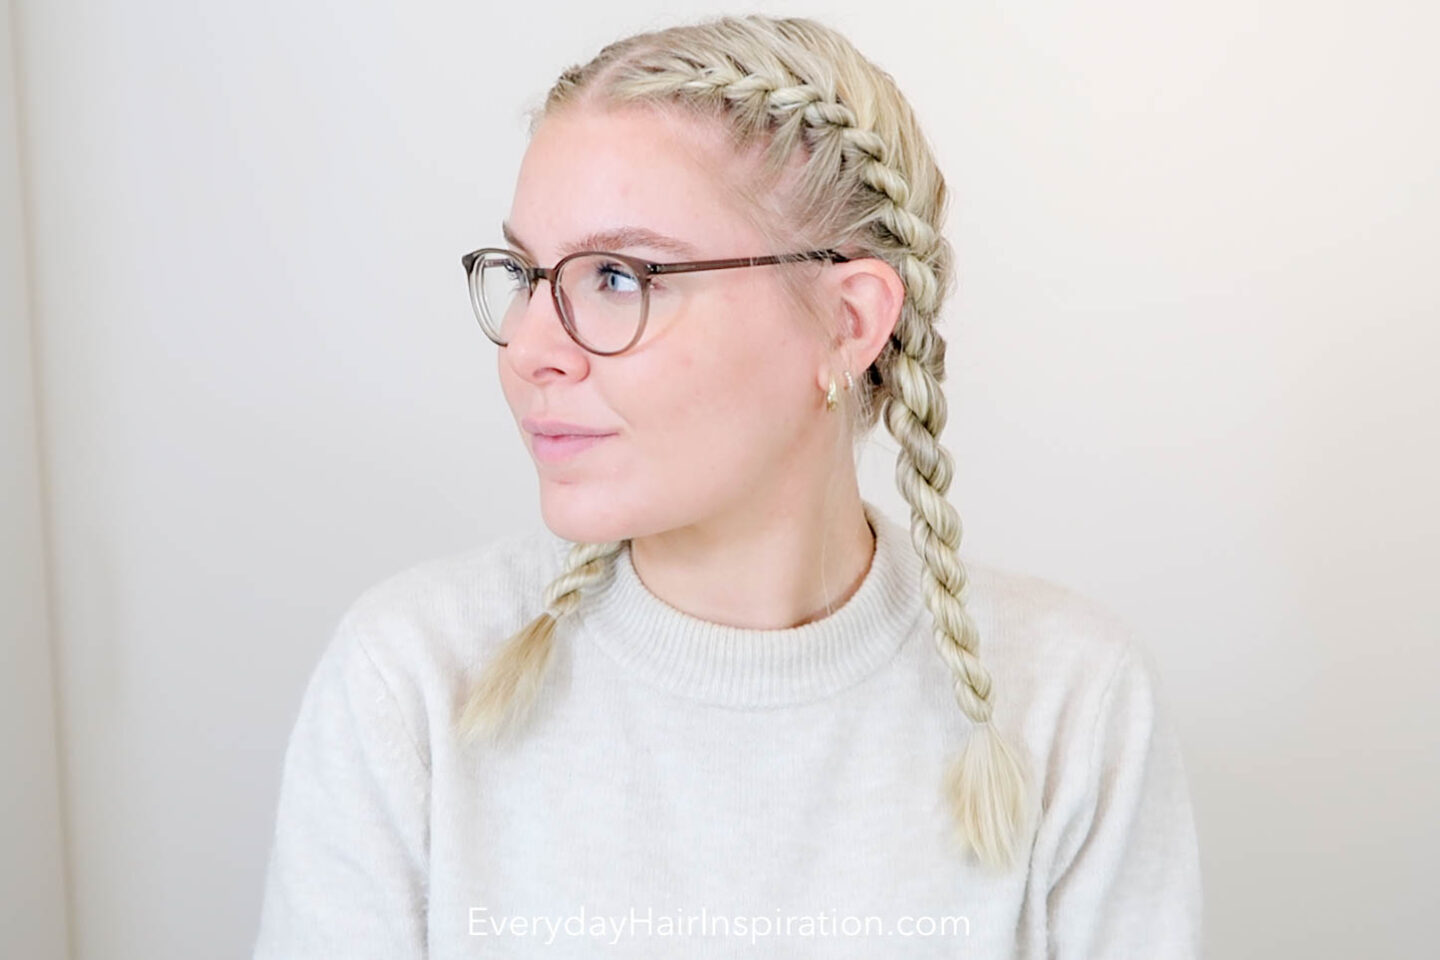 How to Braid Your Own Hair: 6 Tutorials